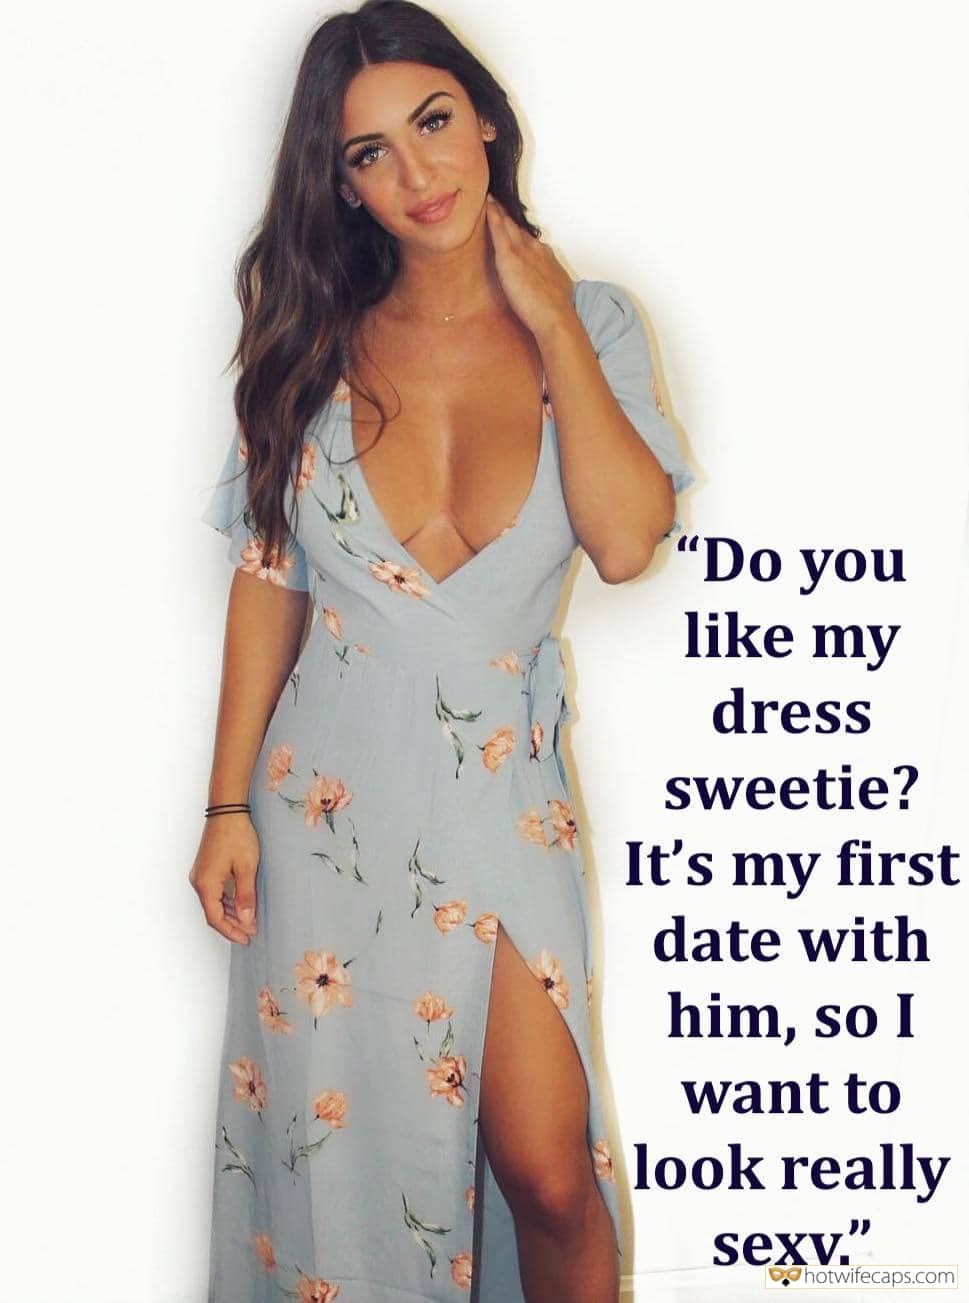 Sexy Memes hotwife caption: “Do you like my dress sweetie? It’s my first date with him, so I want to look really sexy.” Hotwife first date with bull Hotwife Looks Elegant for Her First Date